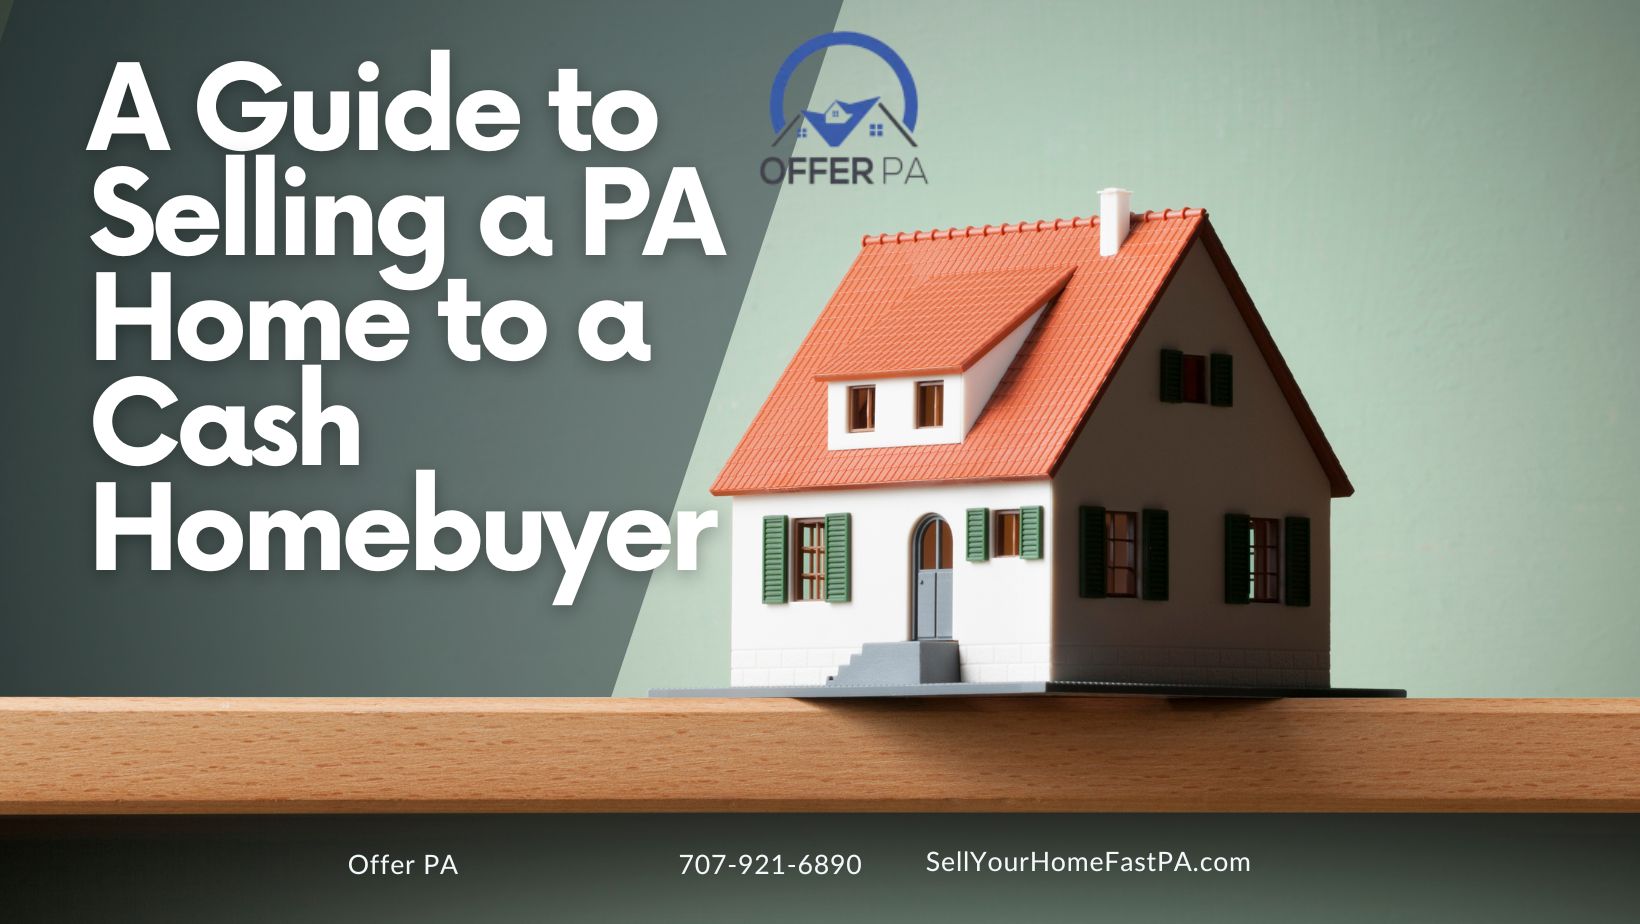 A Guide to Selling a PA Home to a Cash Homebuyer